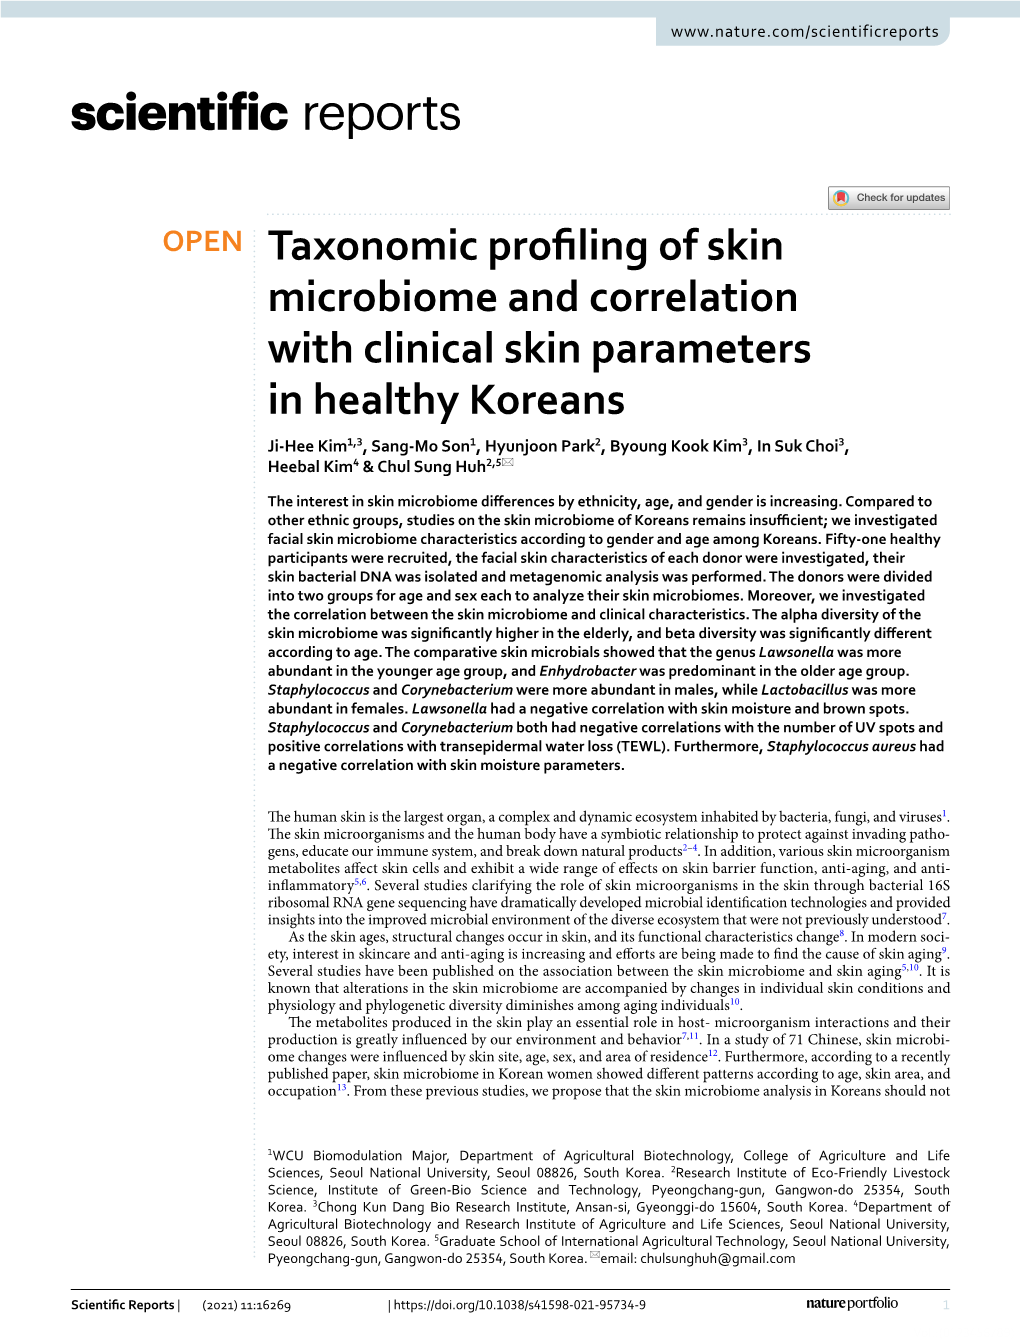 Taxonomic Profiling of Skin Microbiome and Correlation With